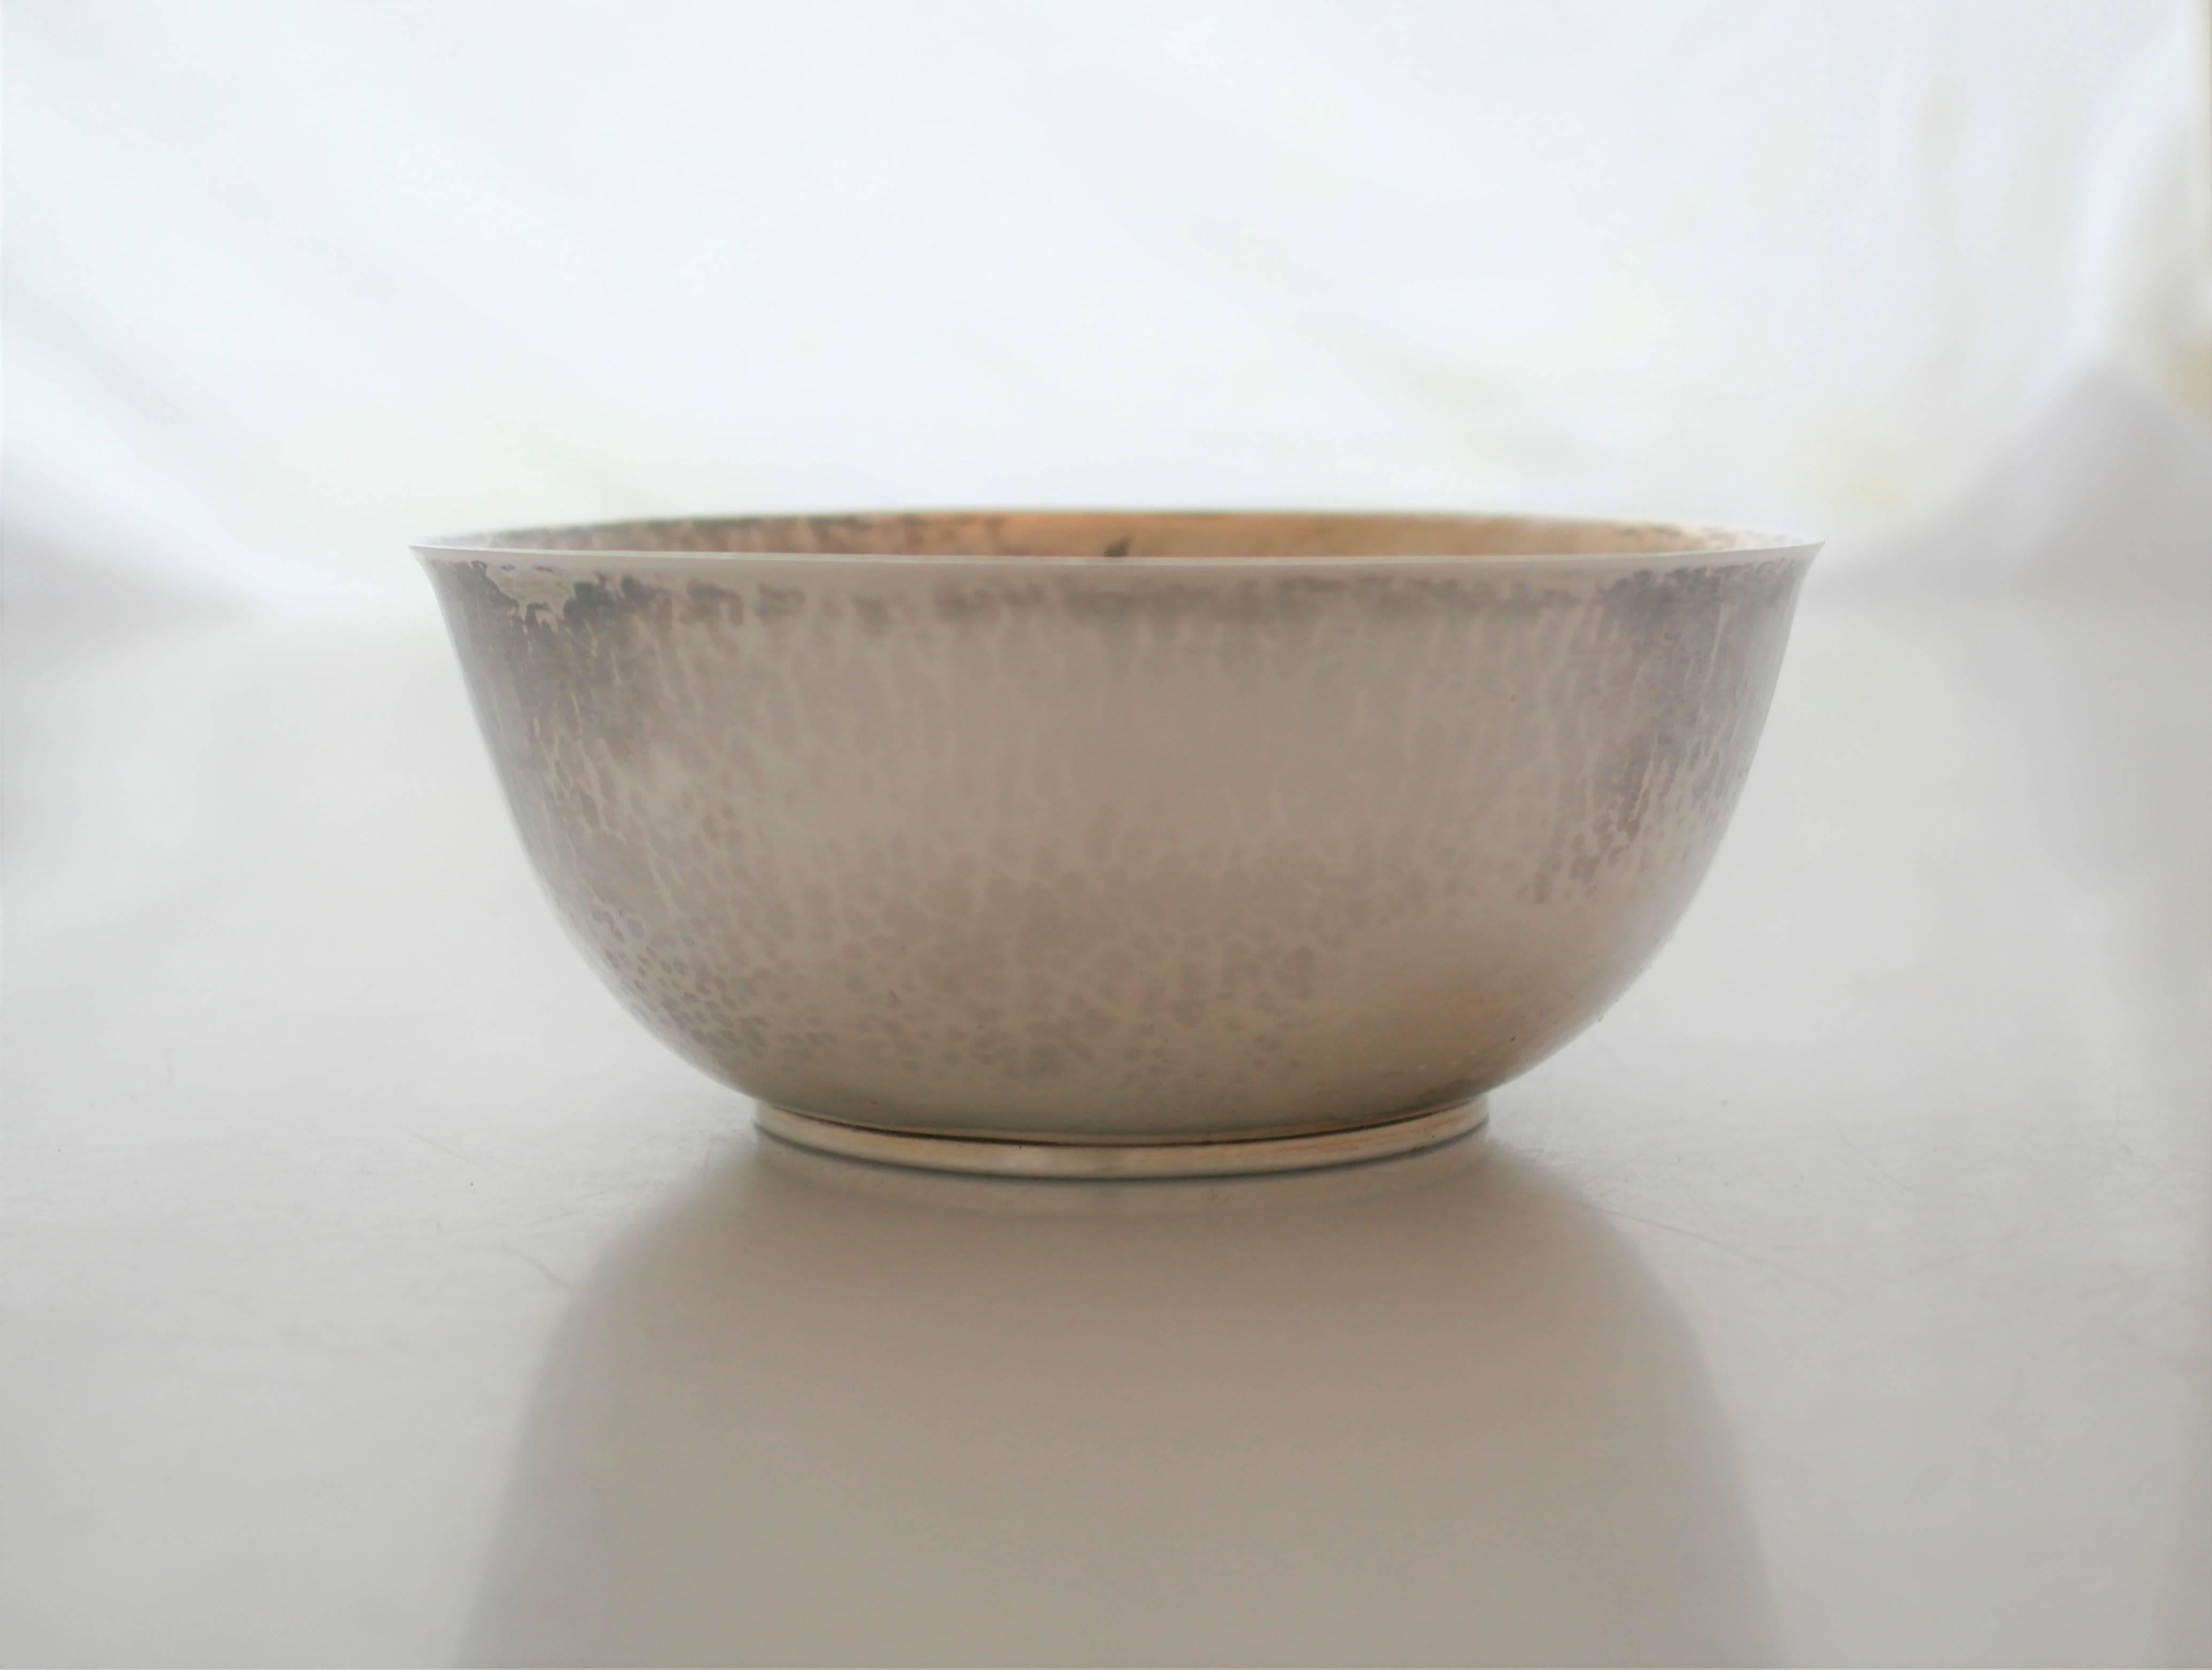 Being offered is a hand-wrought Arts & Crafts period sterling silver bowl made by Frederick Gyllenberg at the handicraft shop in Boston, Massachusetts. Hand raised bowl with all-over spot hammering; on a circular pedestal base. Dimensions: 5 1/2